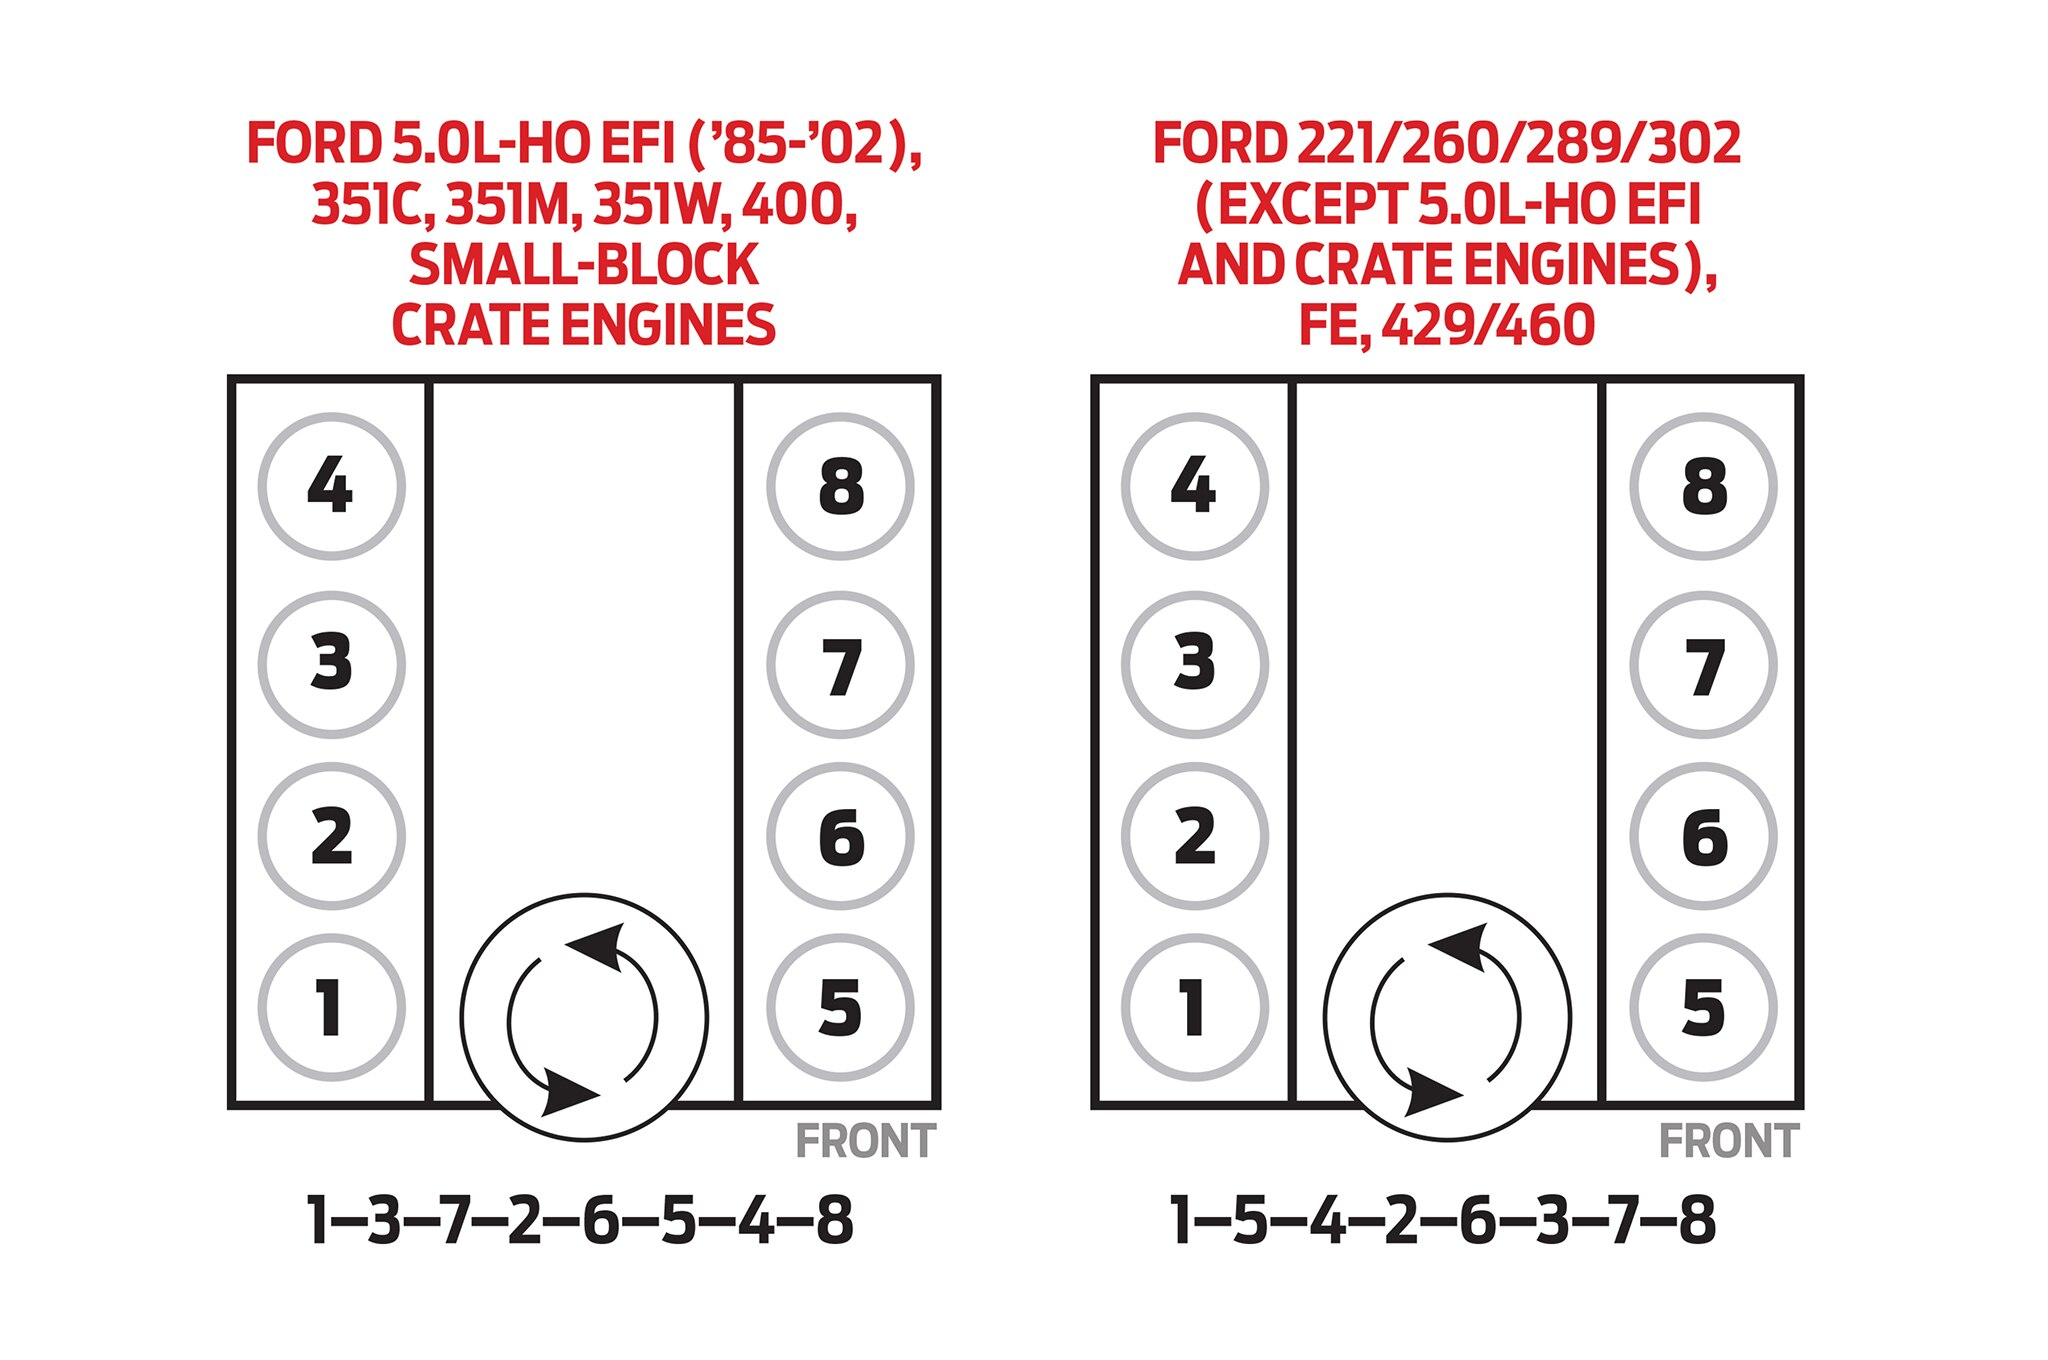 Kd_3060] Ford F 150 4 6 Engine Diagram Together With Engine